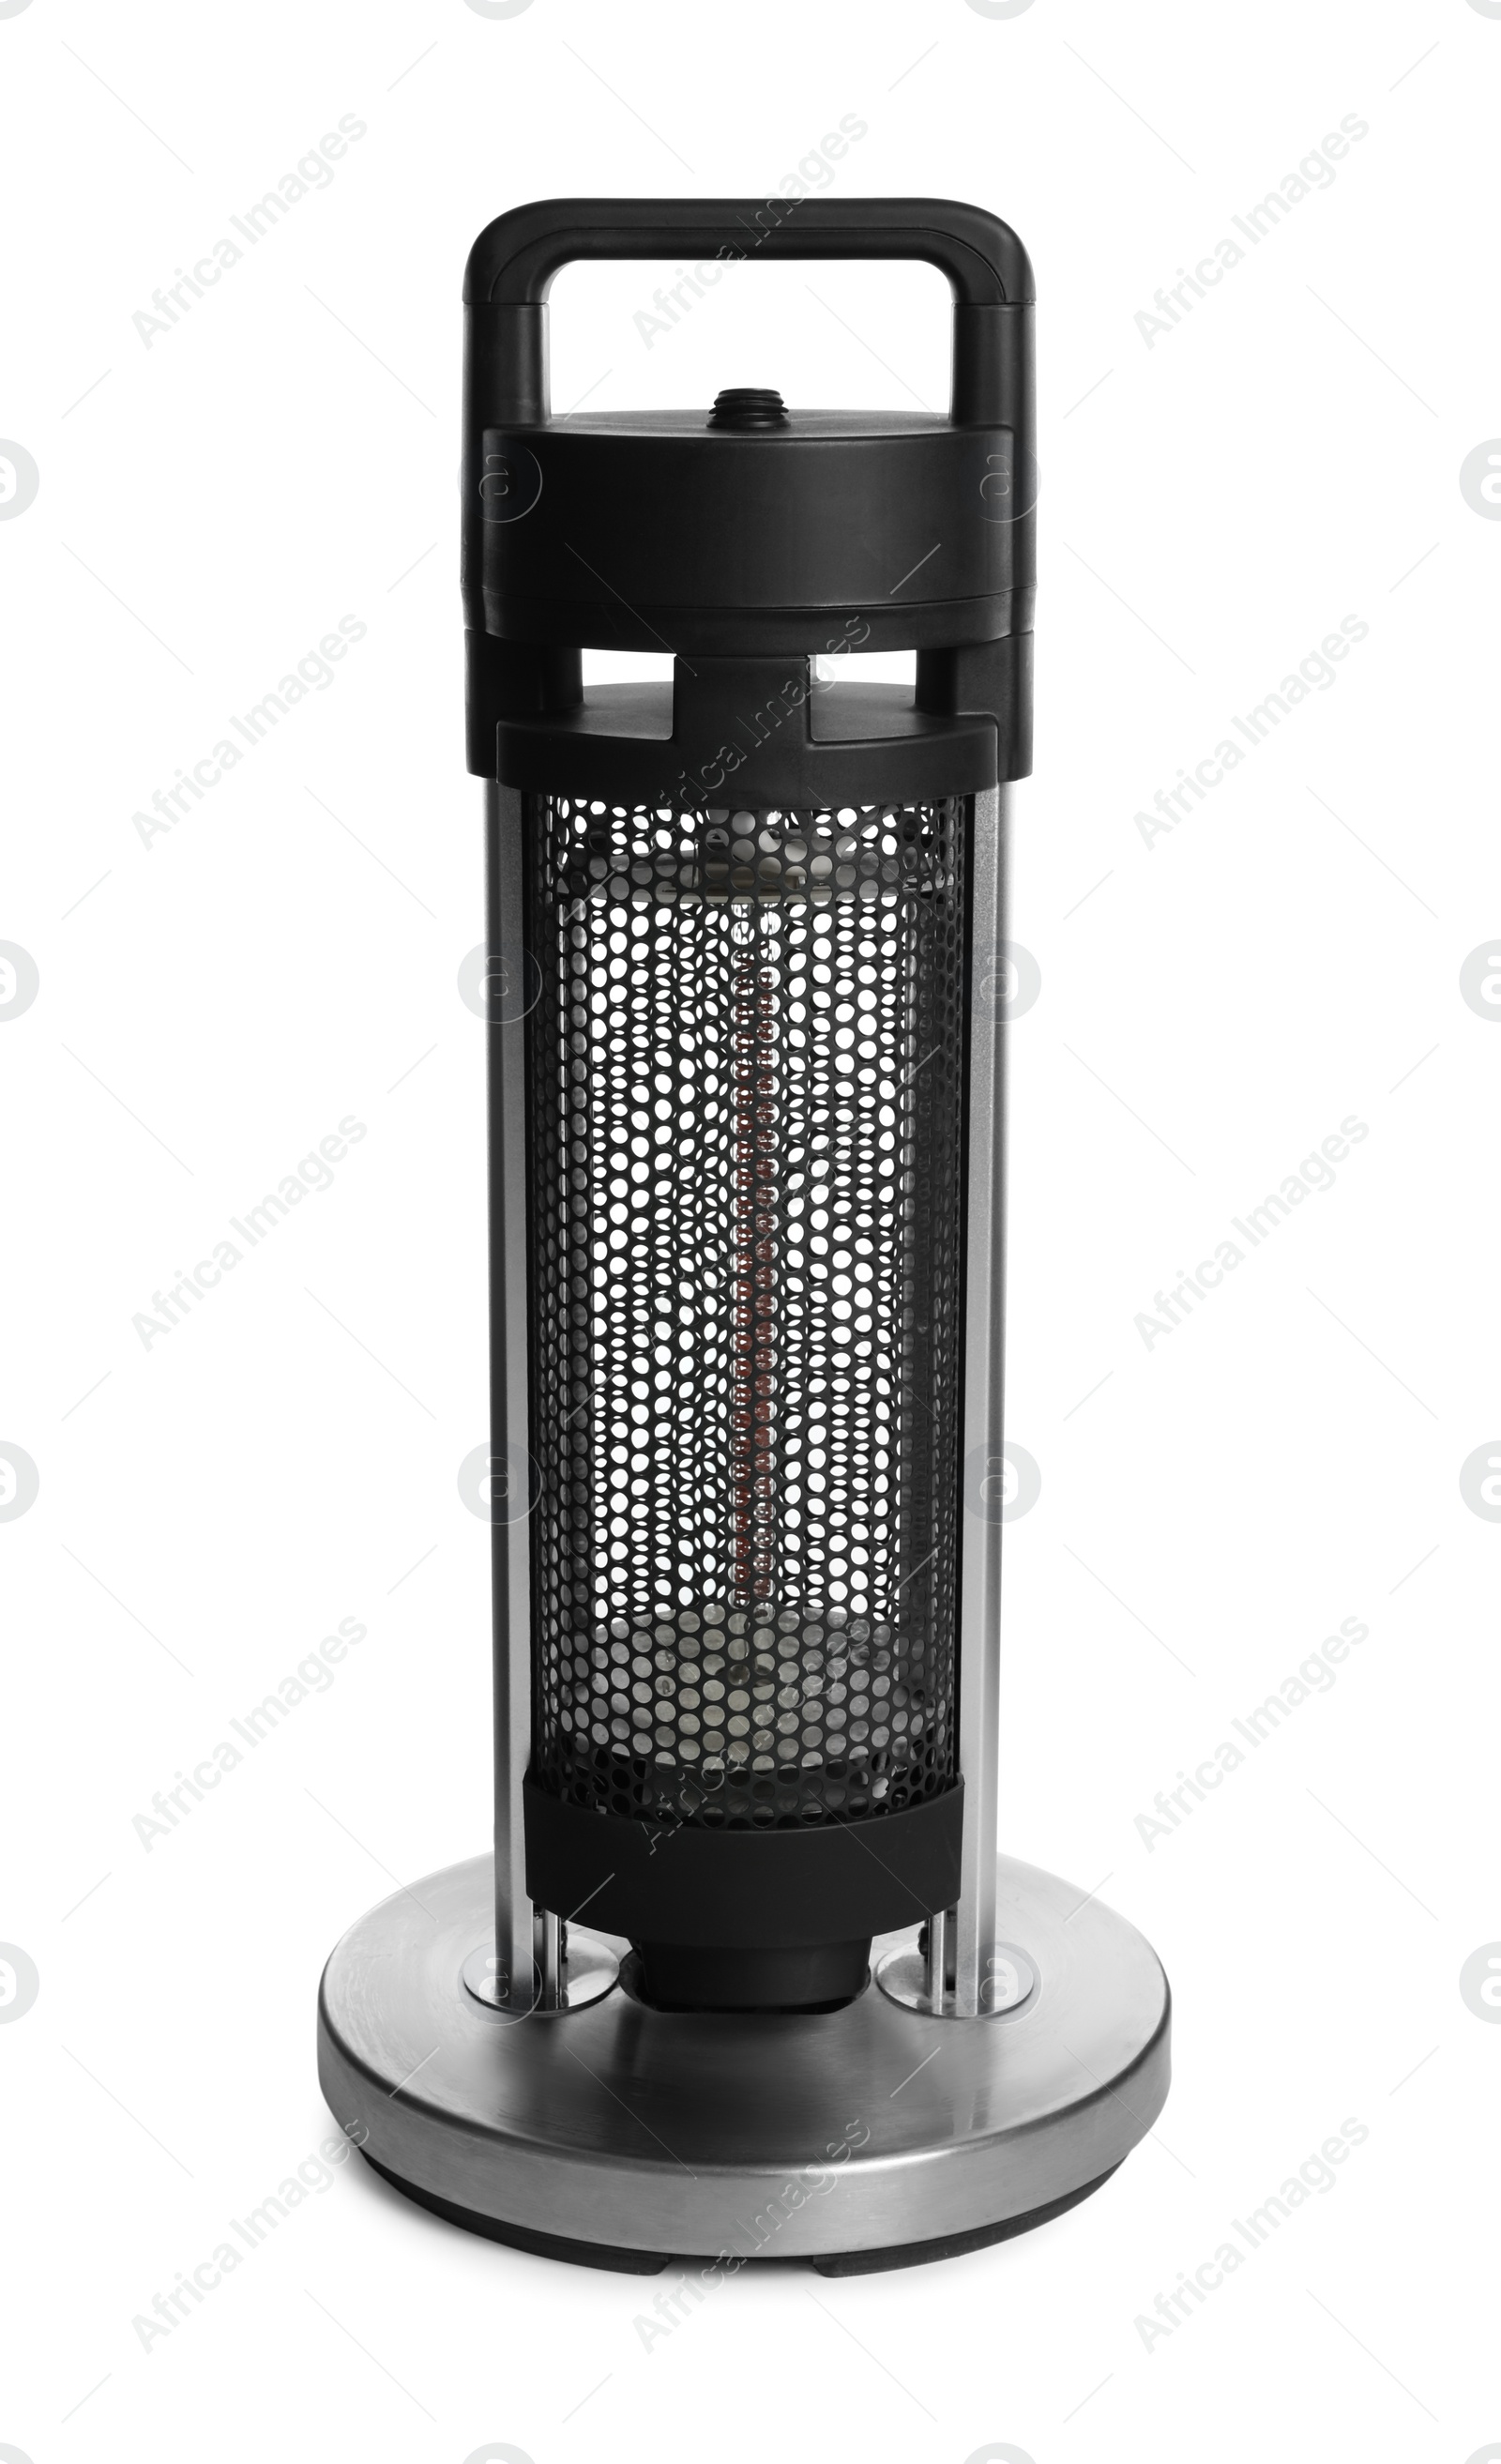 Photo of New modern electric heater isolated on white